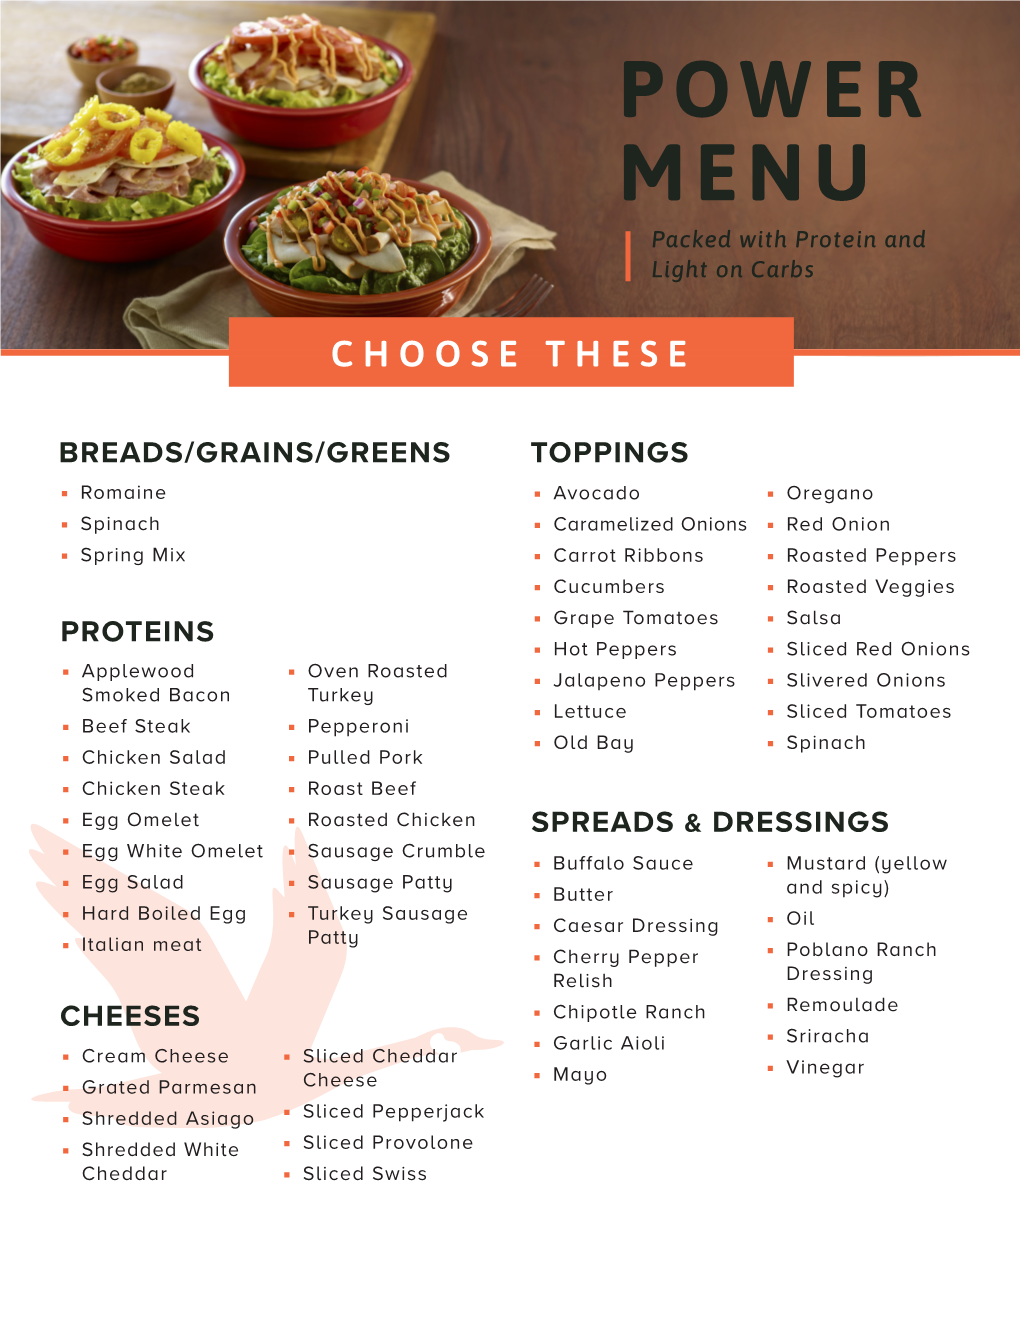 POWER MENU Packed with Protein and Light on Carbs